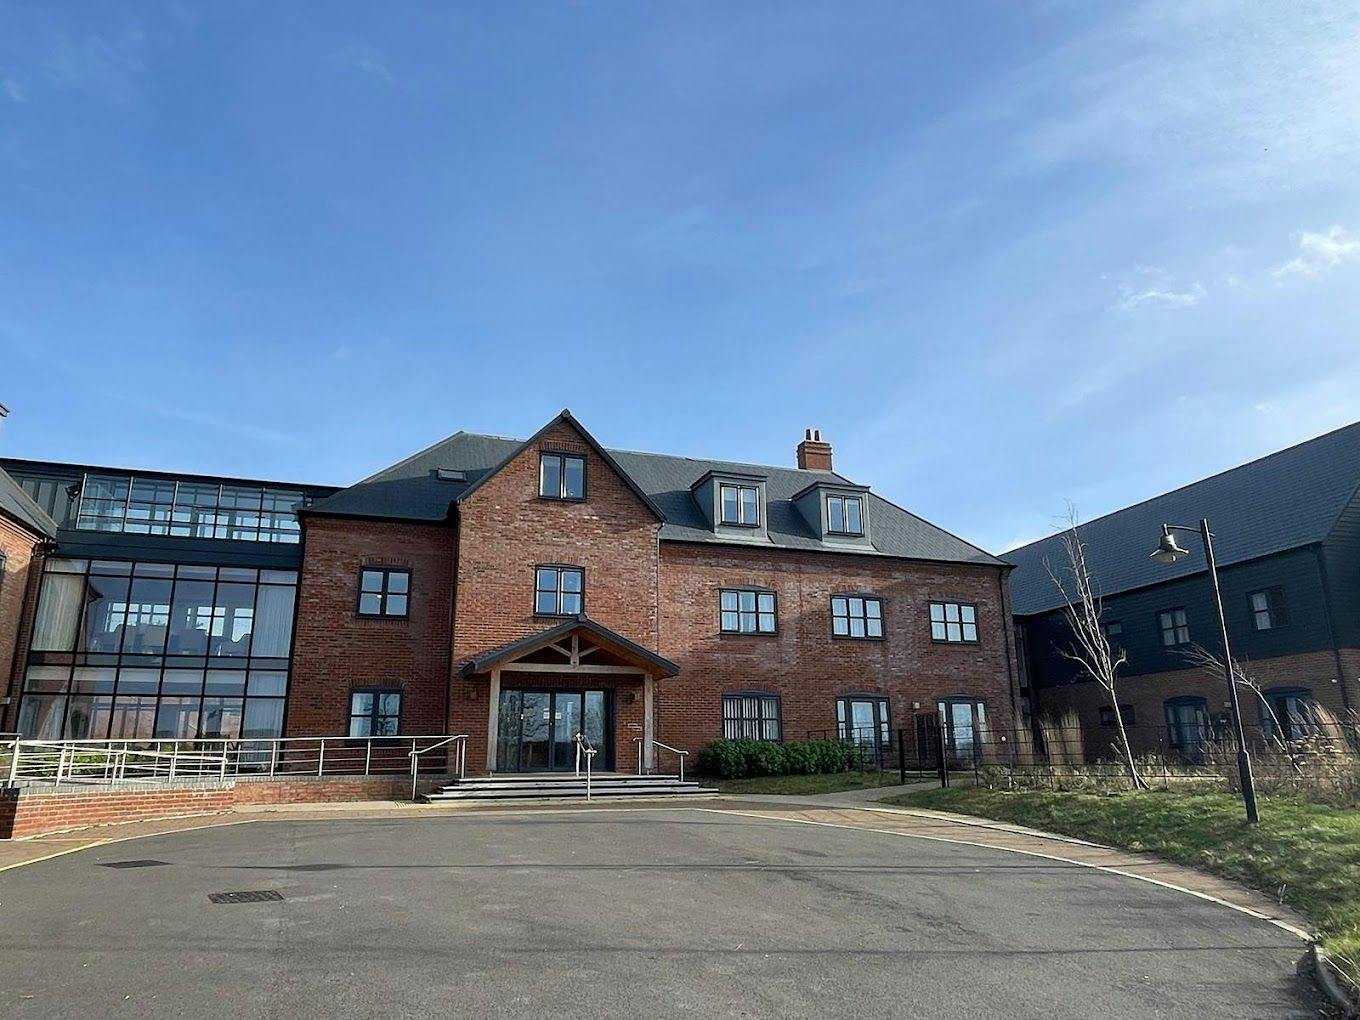 Exterior of Carpenders Park care home in Watford